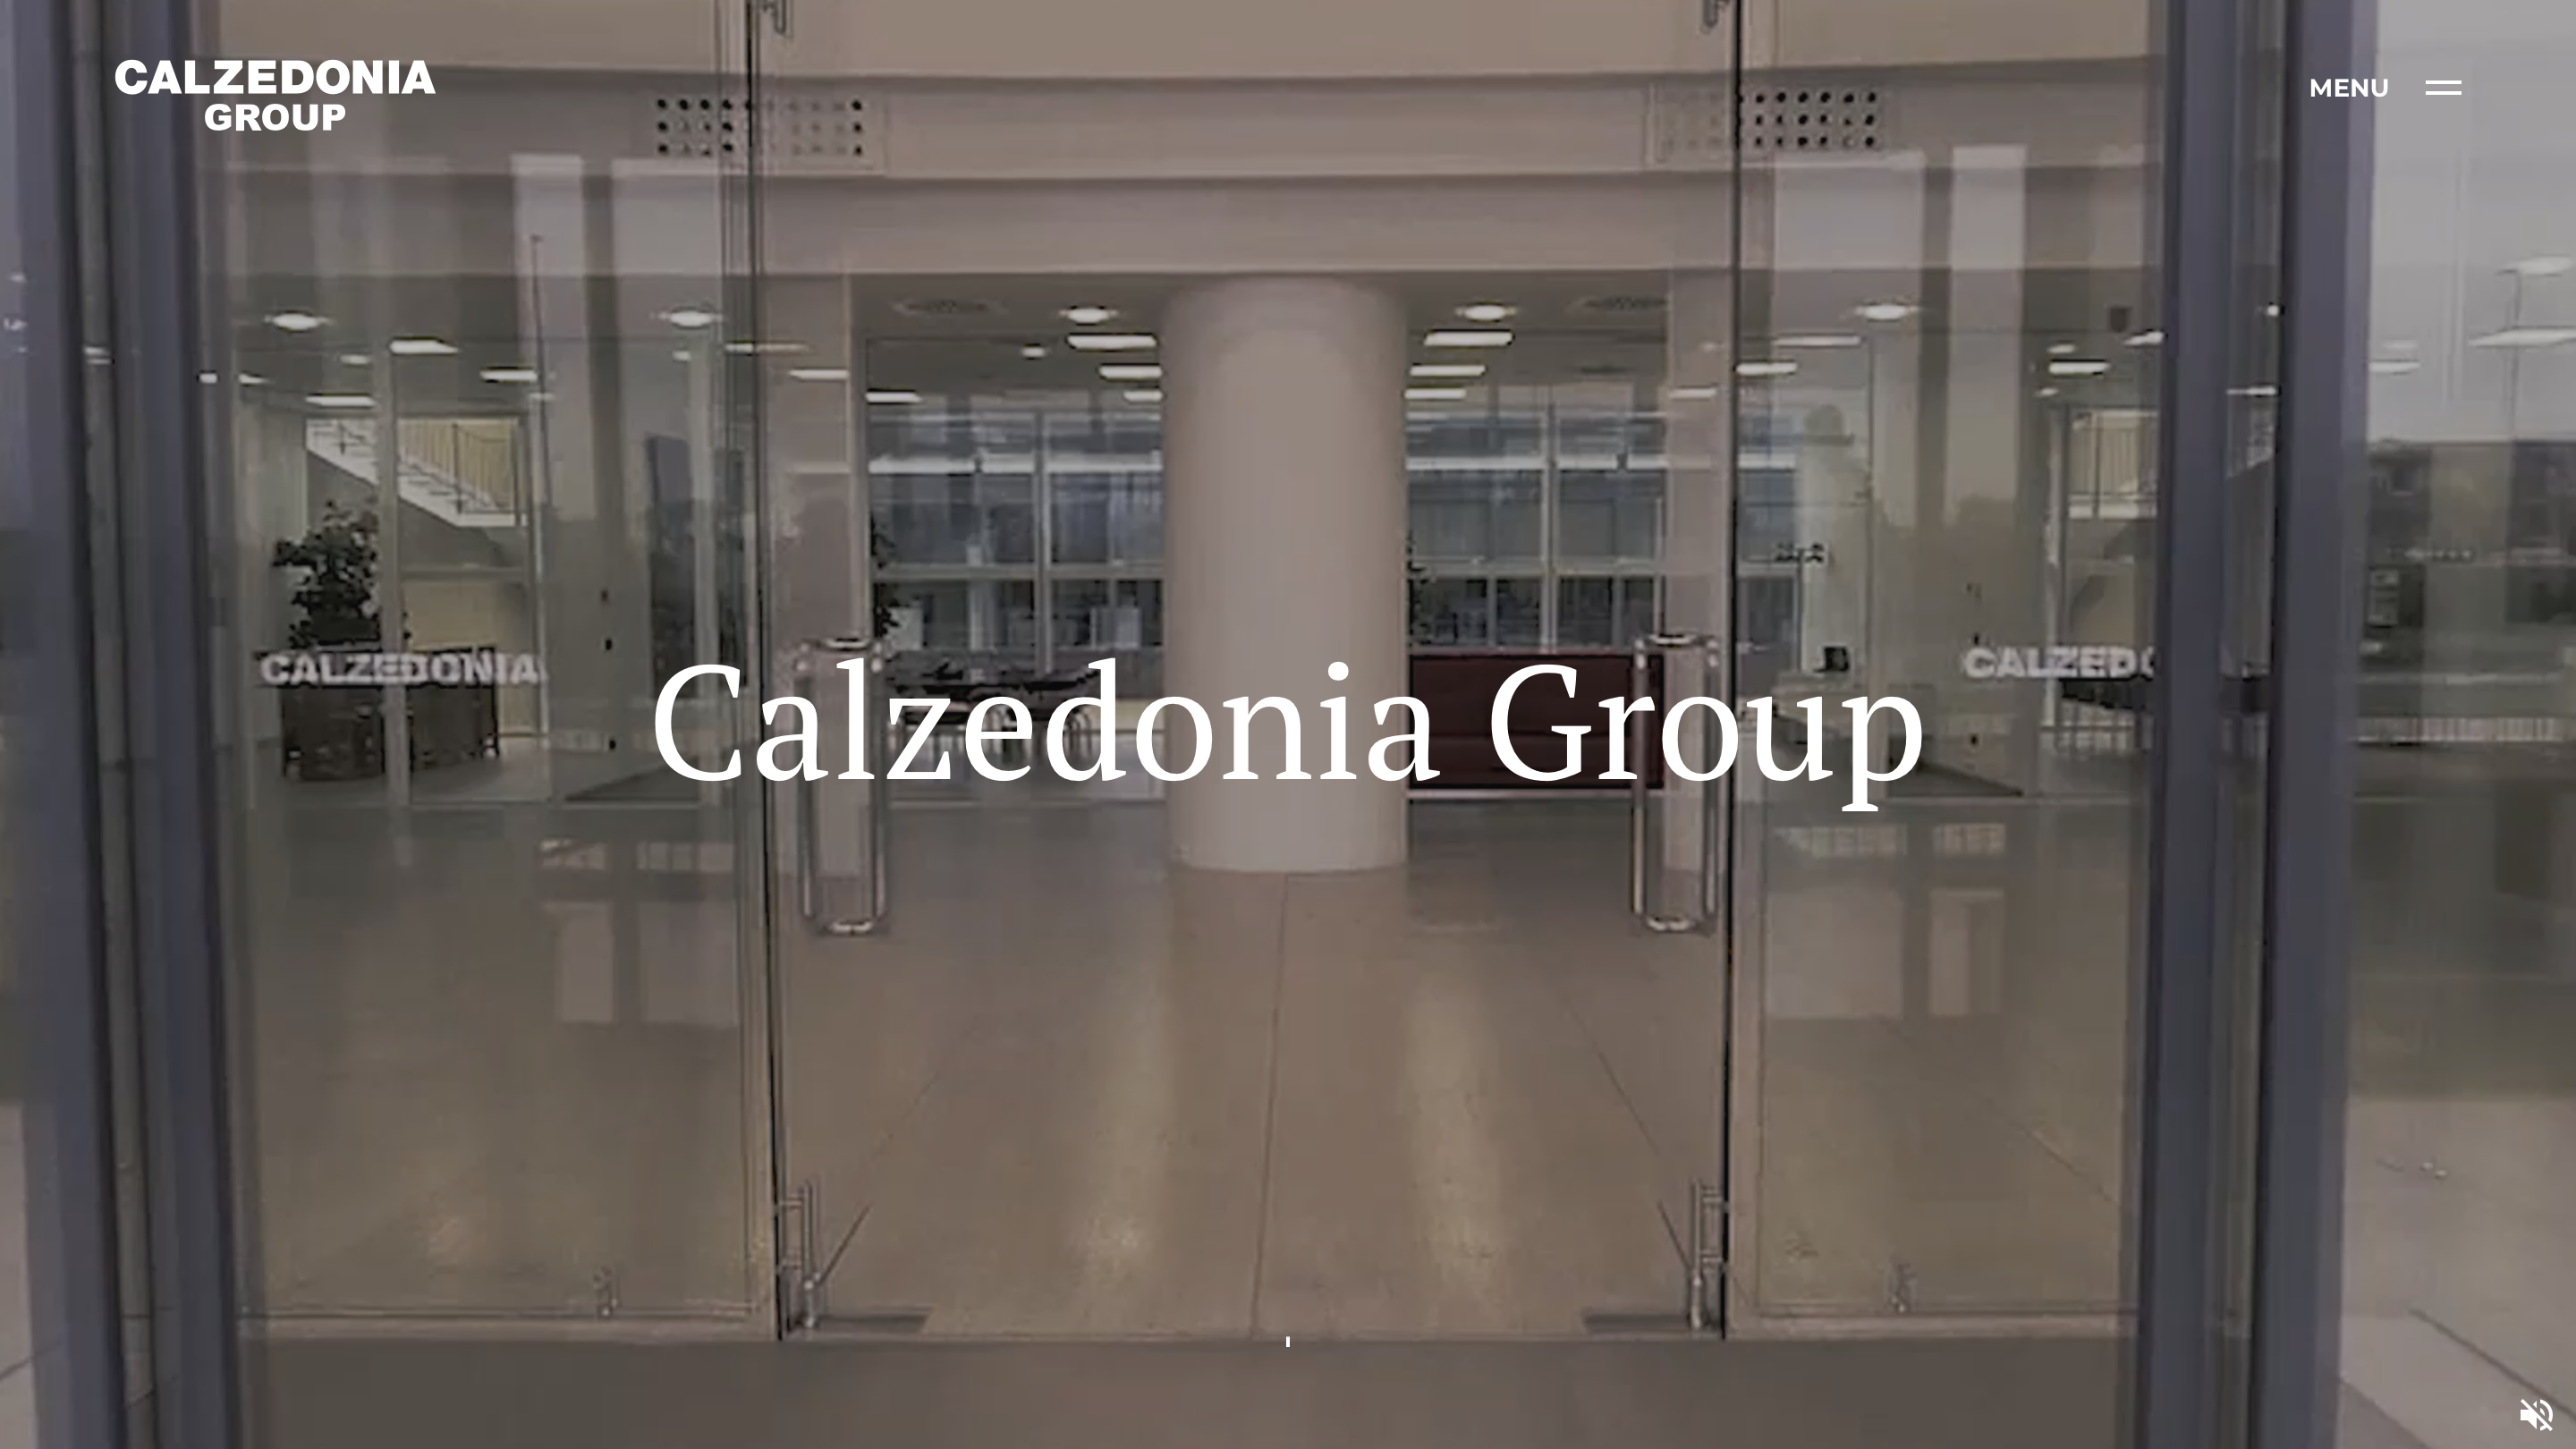 Italian Fashion Group Calzedonia Opened 252 New Stores and Revenues Exceed 3 Billion Euros in 2022